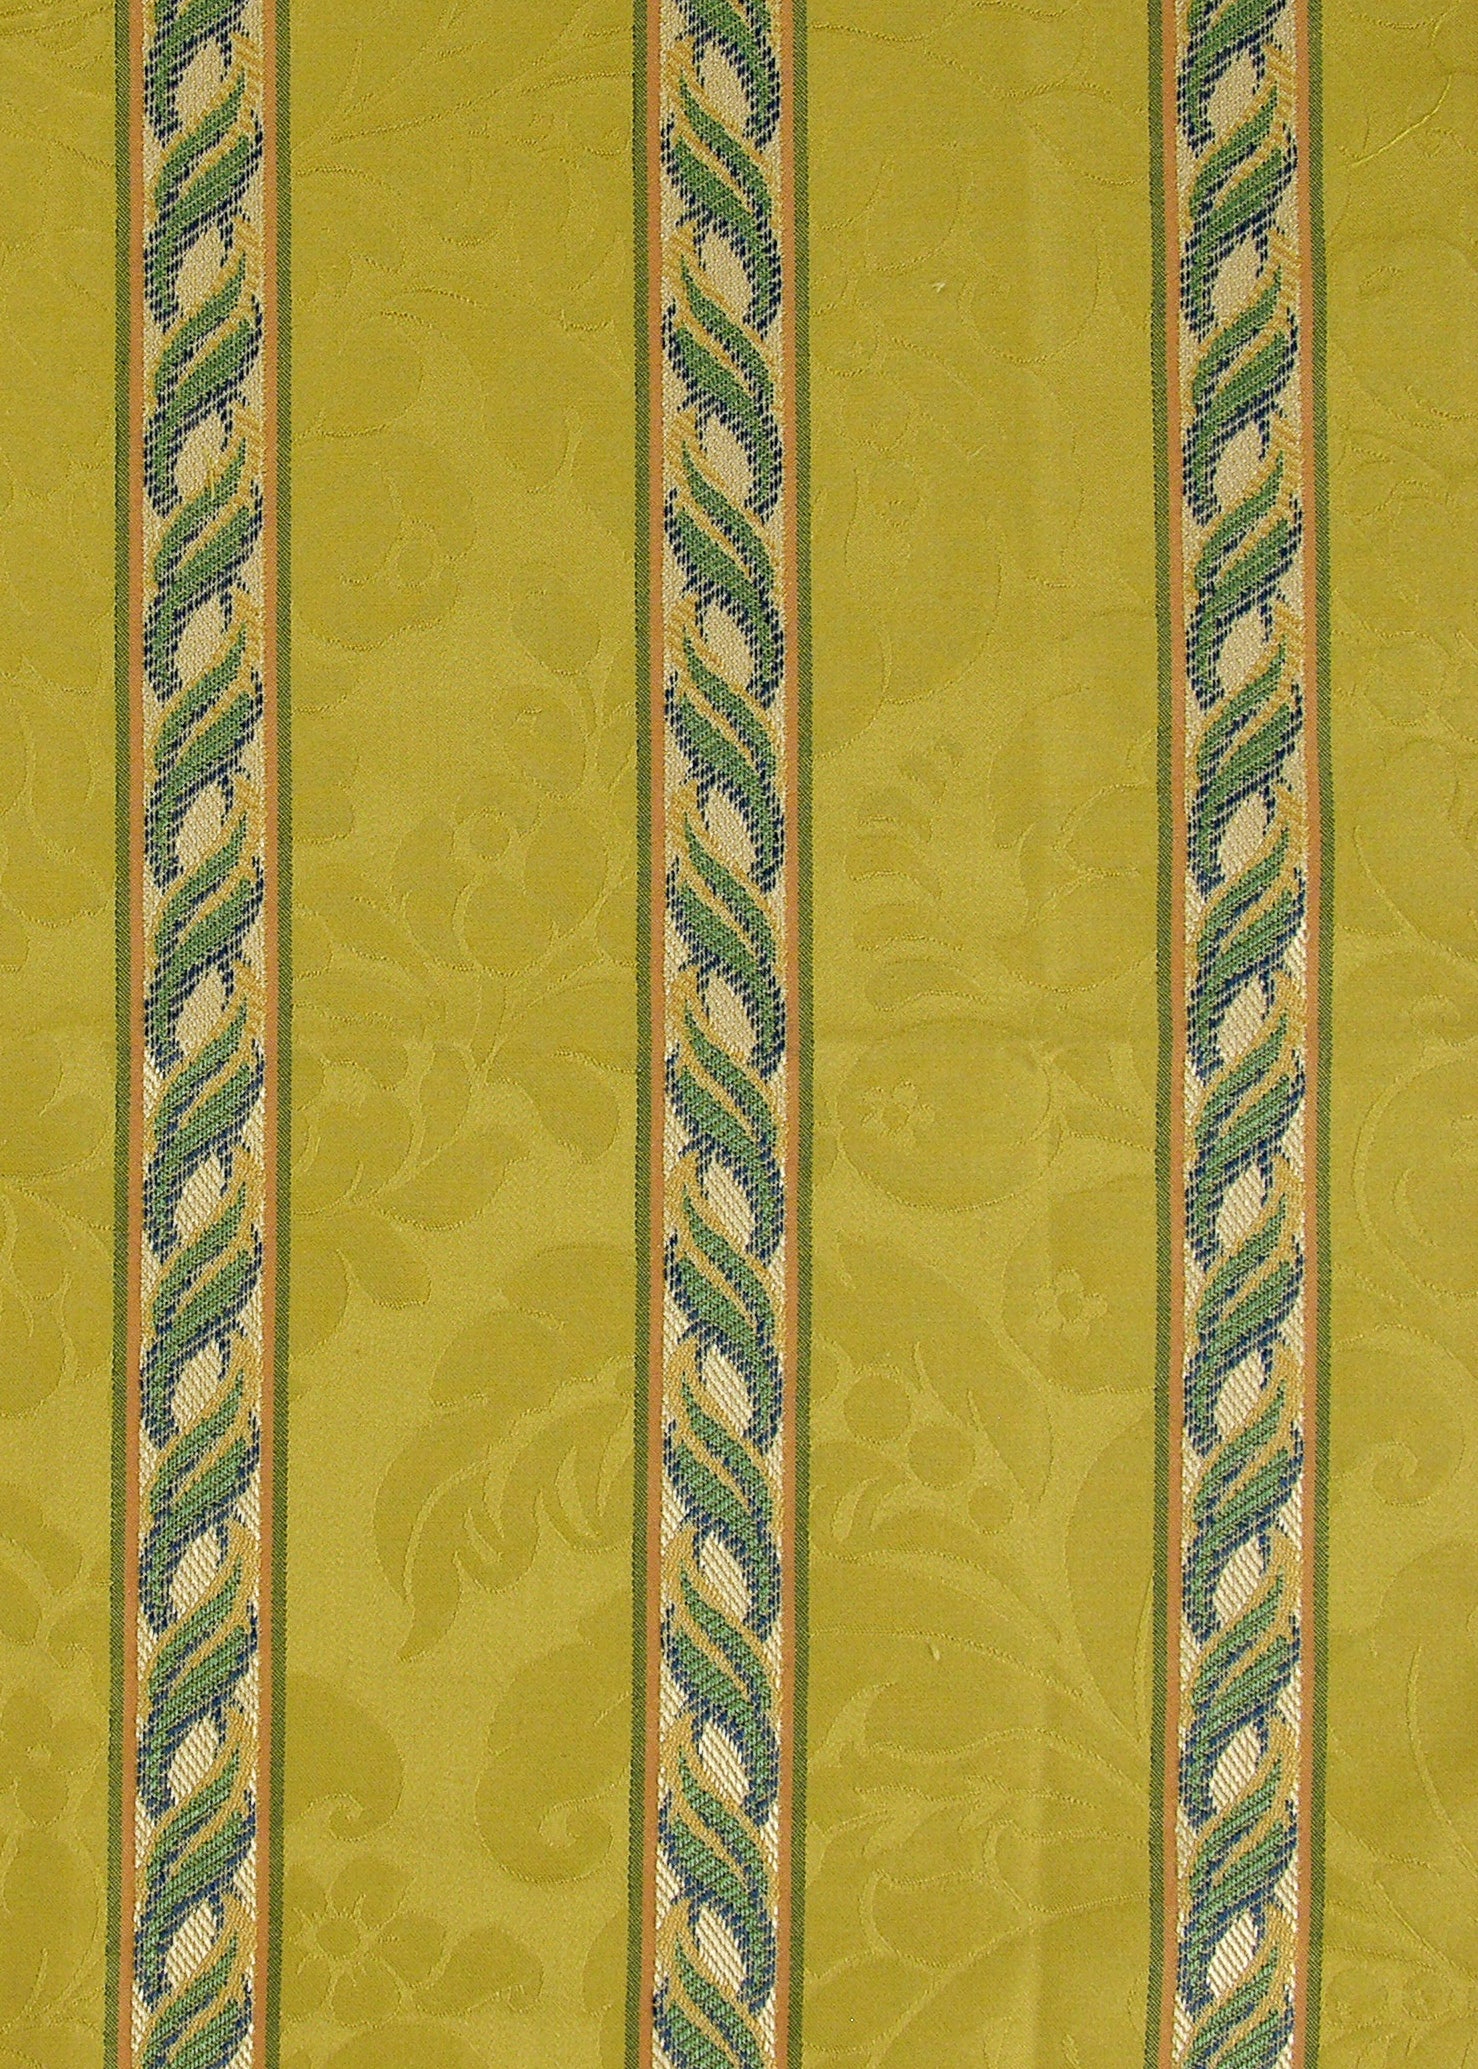 golden yellow fabric with a damask pattern and vertical stripes